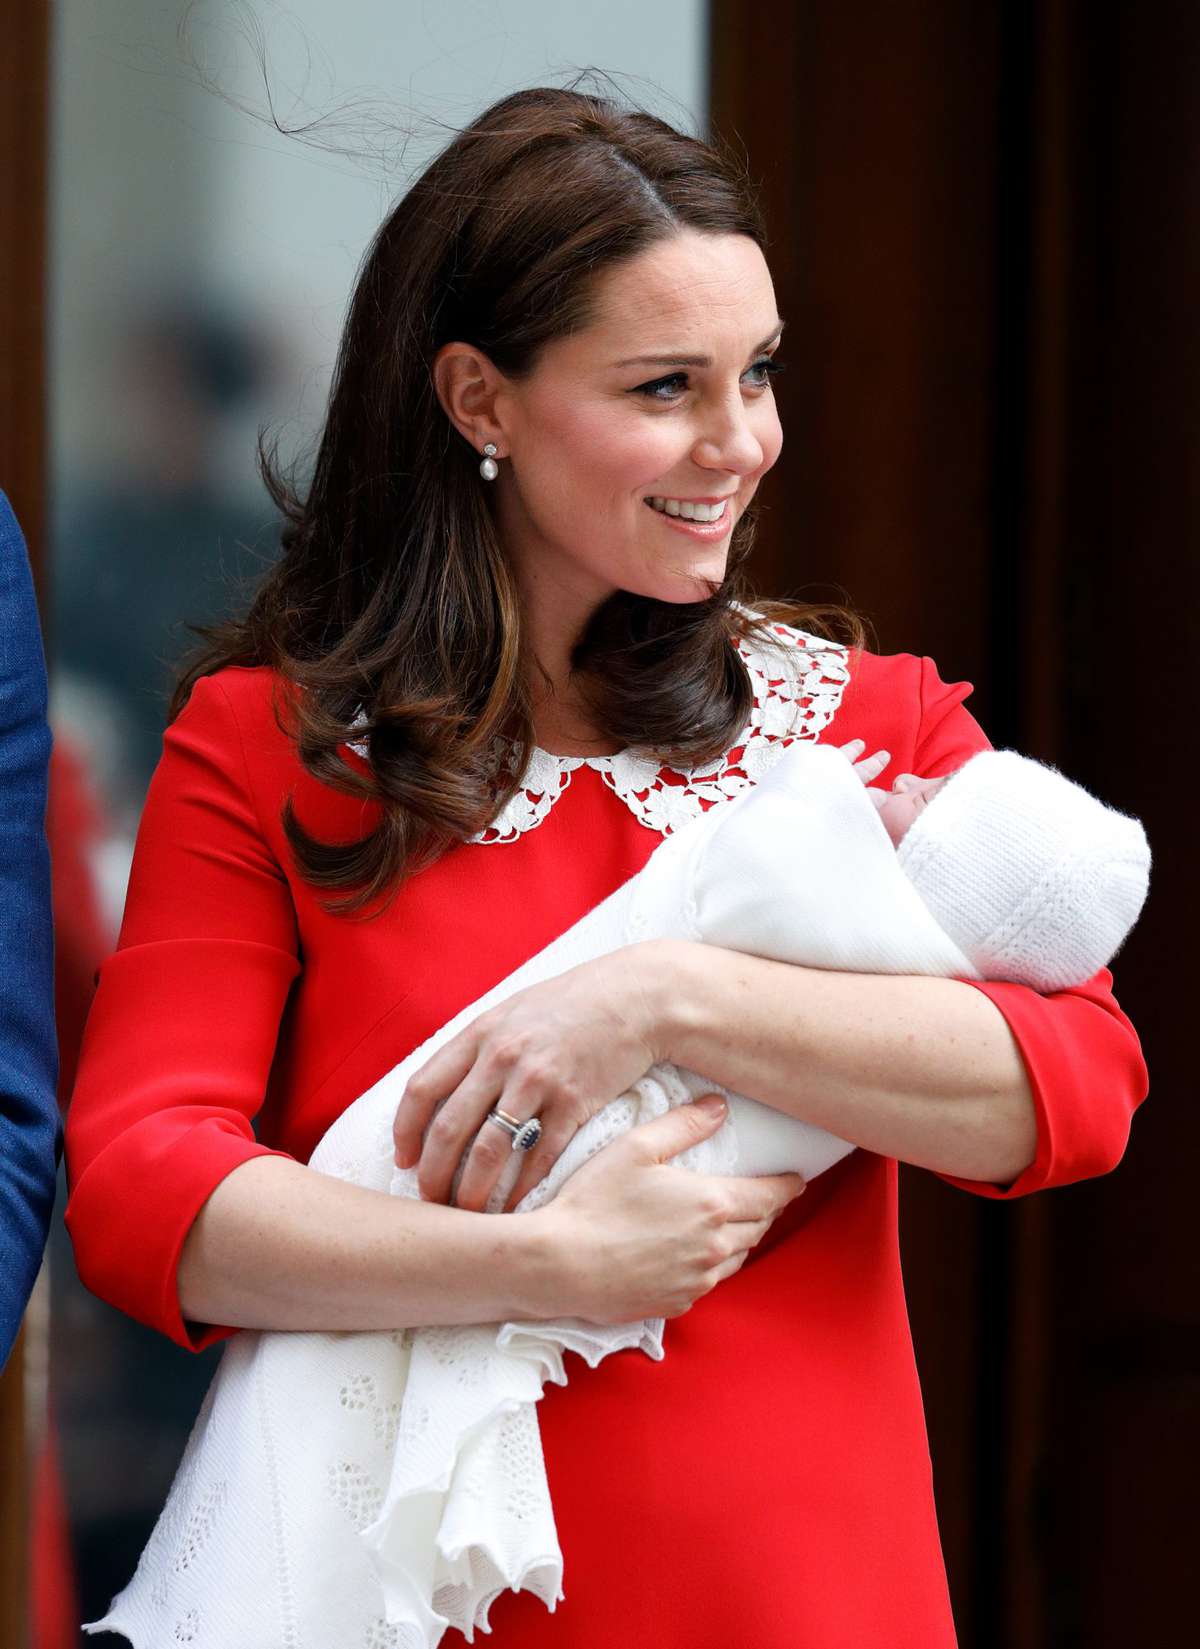 The Duke & Duchess Of Cambridge Depart The Lindo Wing With Their New Son